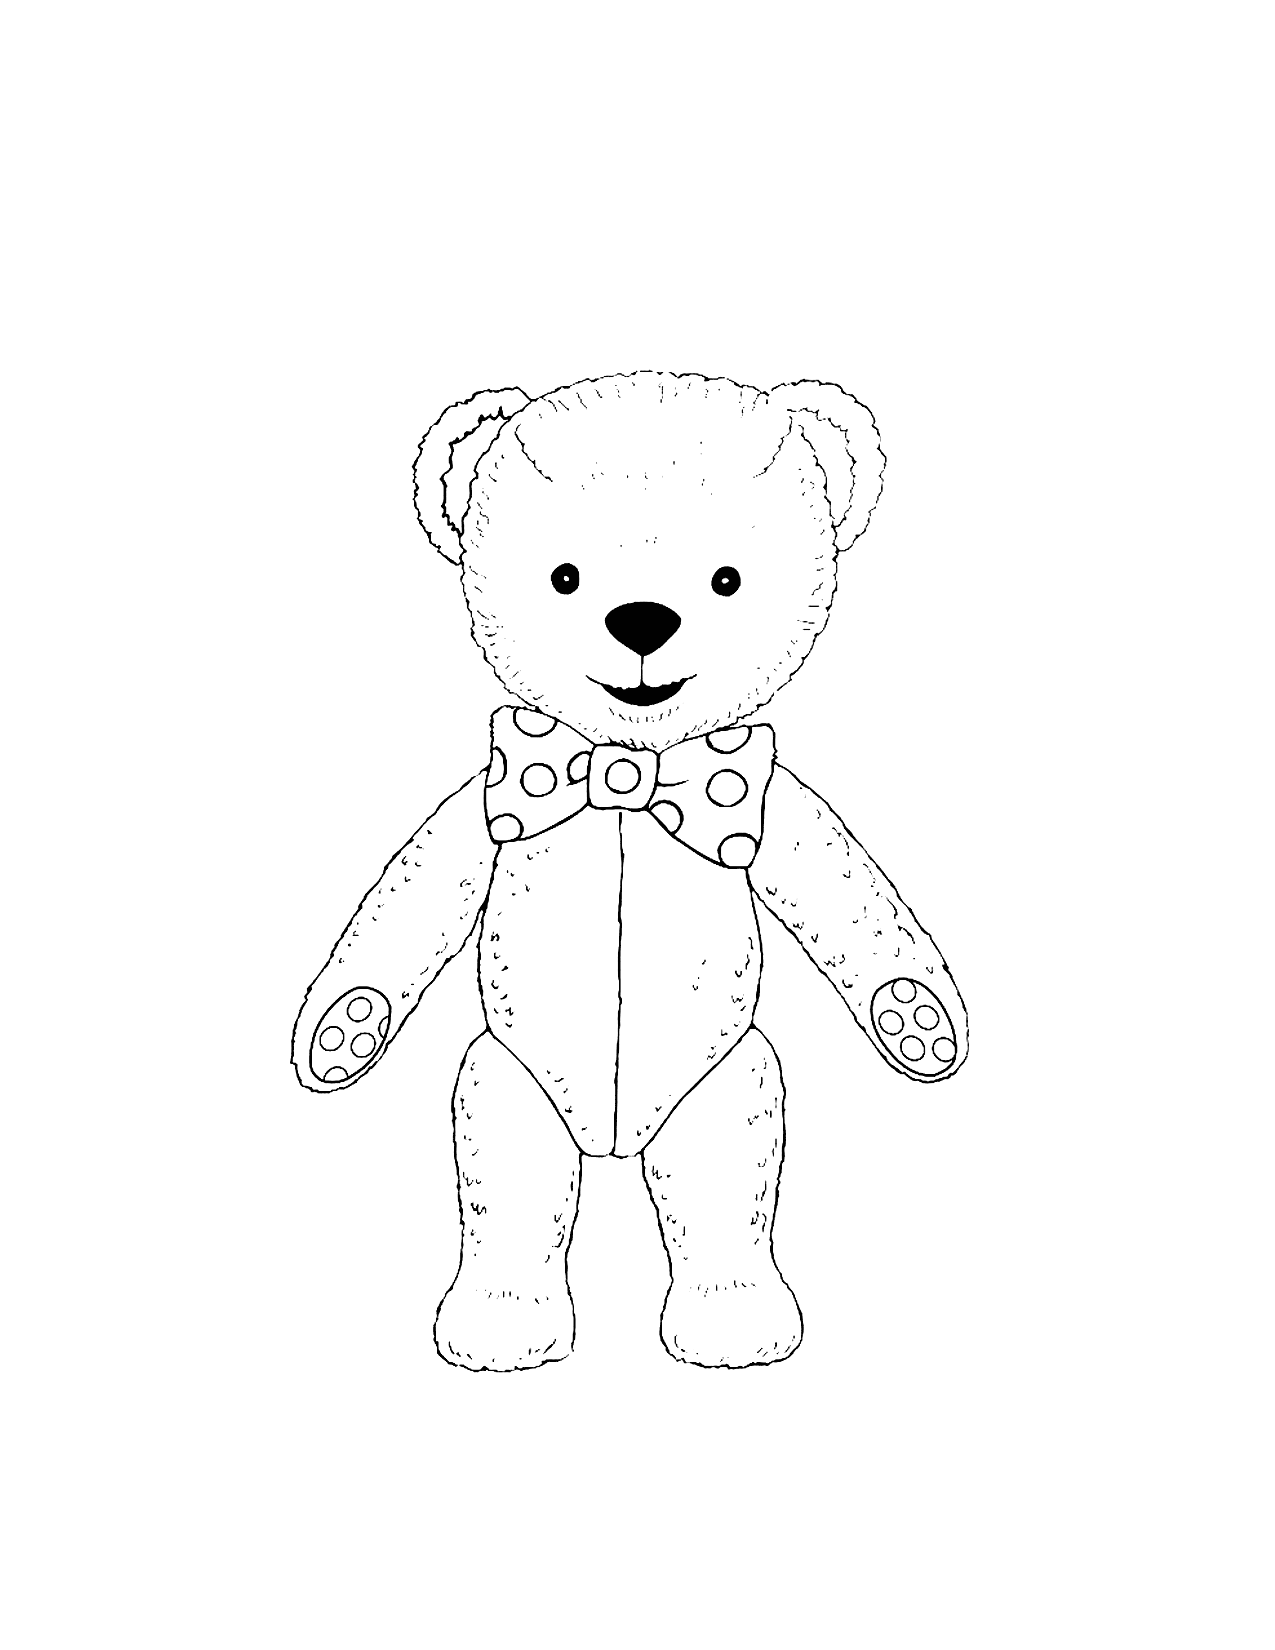 Teddy Bear With A Bow Tie Coloring Page